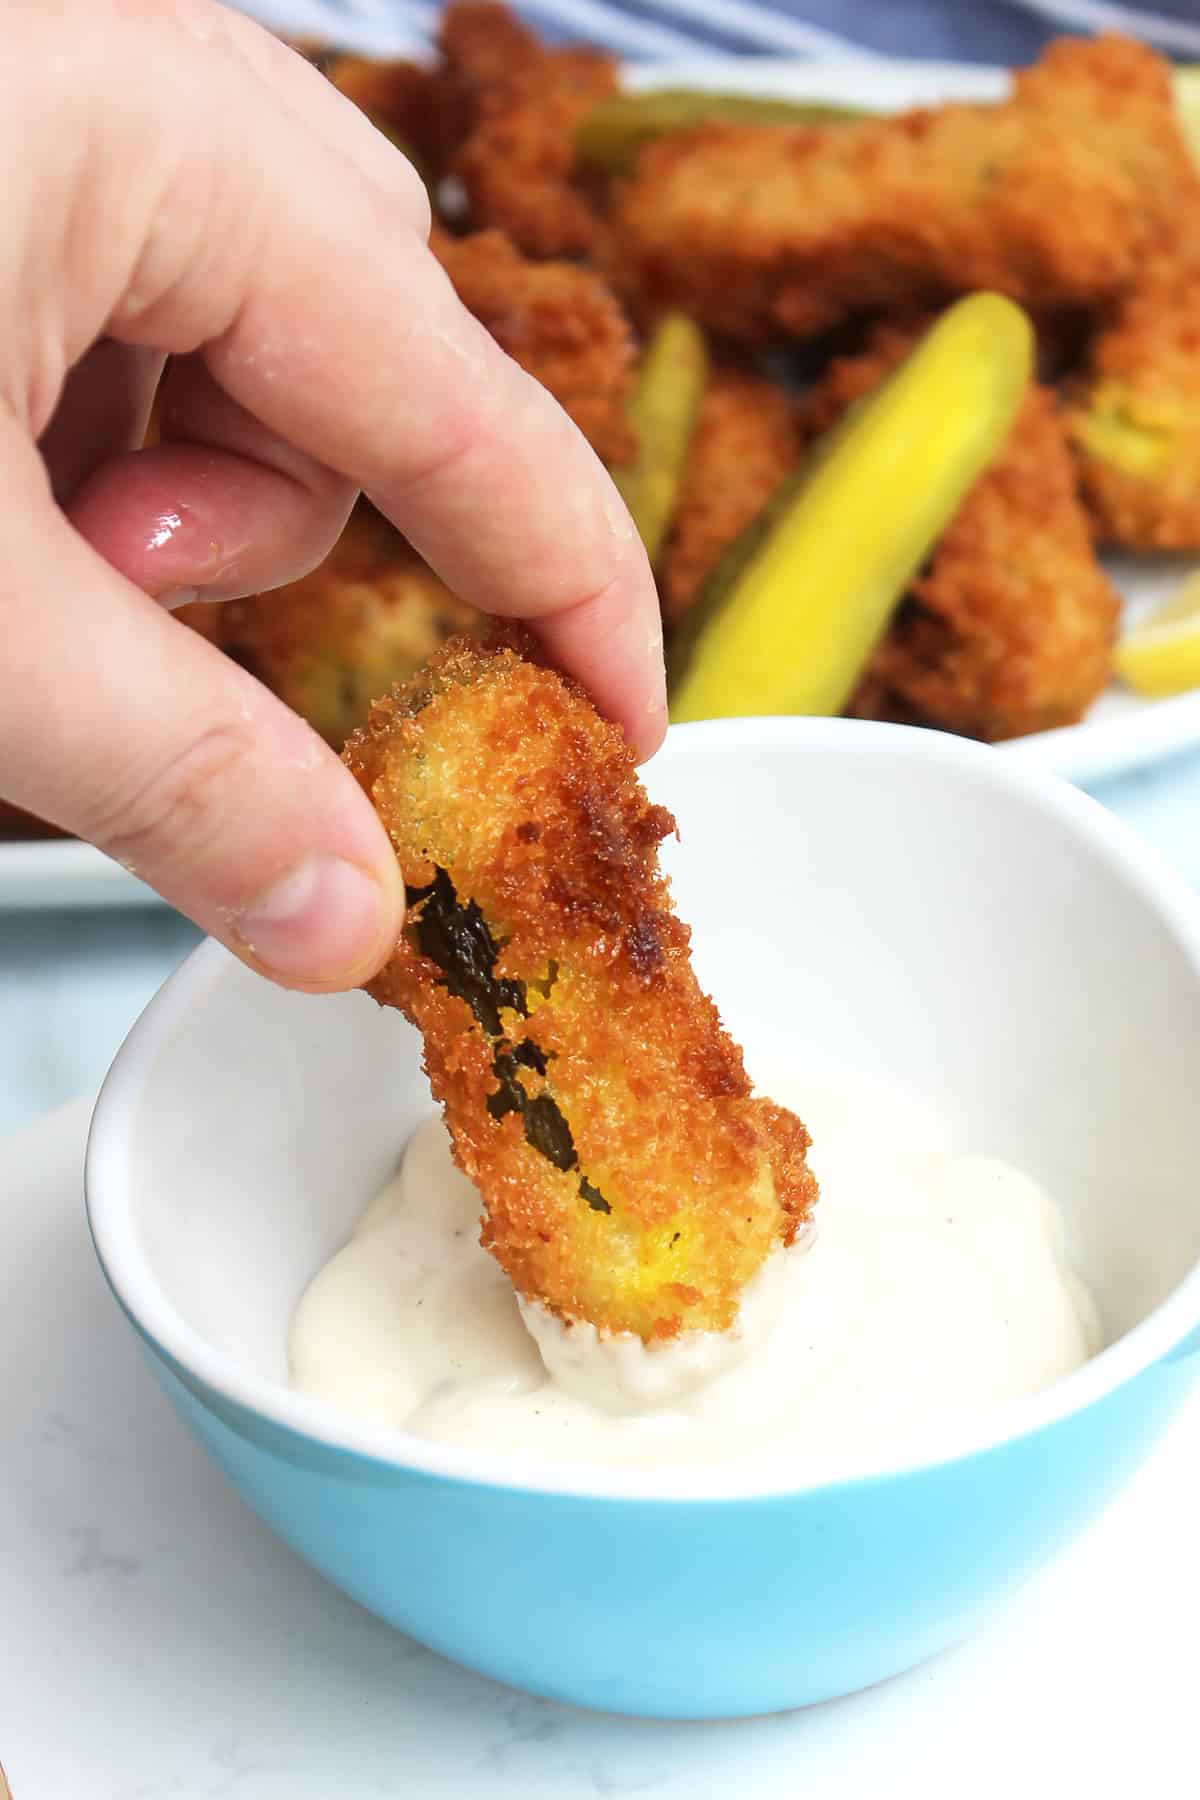 Dipping a frickle into ranch sauce